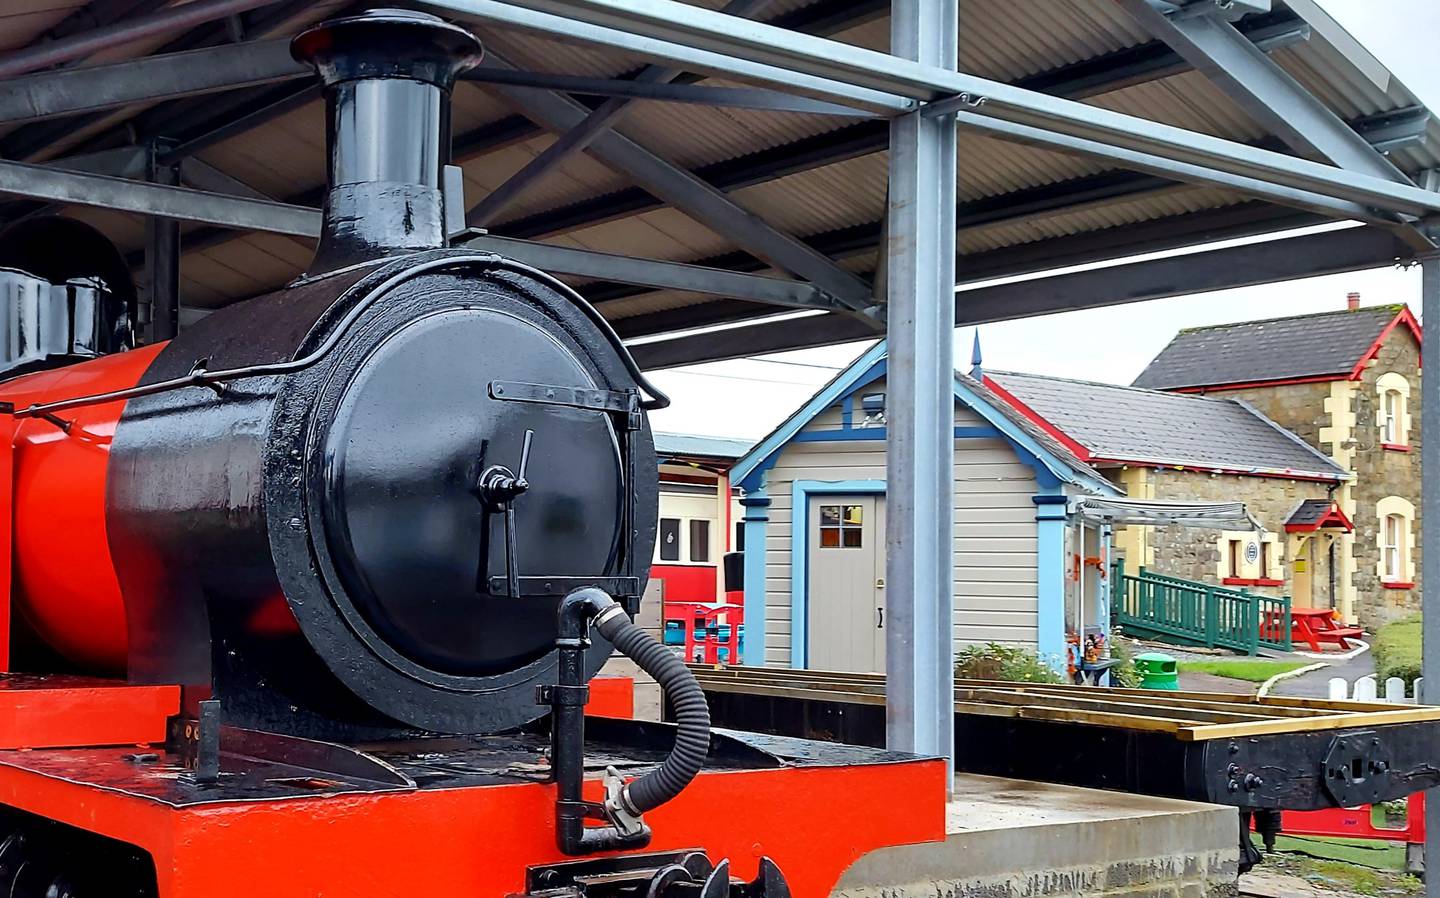 An original Donegal steam locomotive, Drumboe, is now on display outside the museum in Donegal town. Photograph: Donegal Railway Heritage Centre